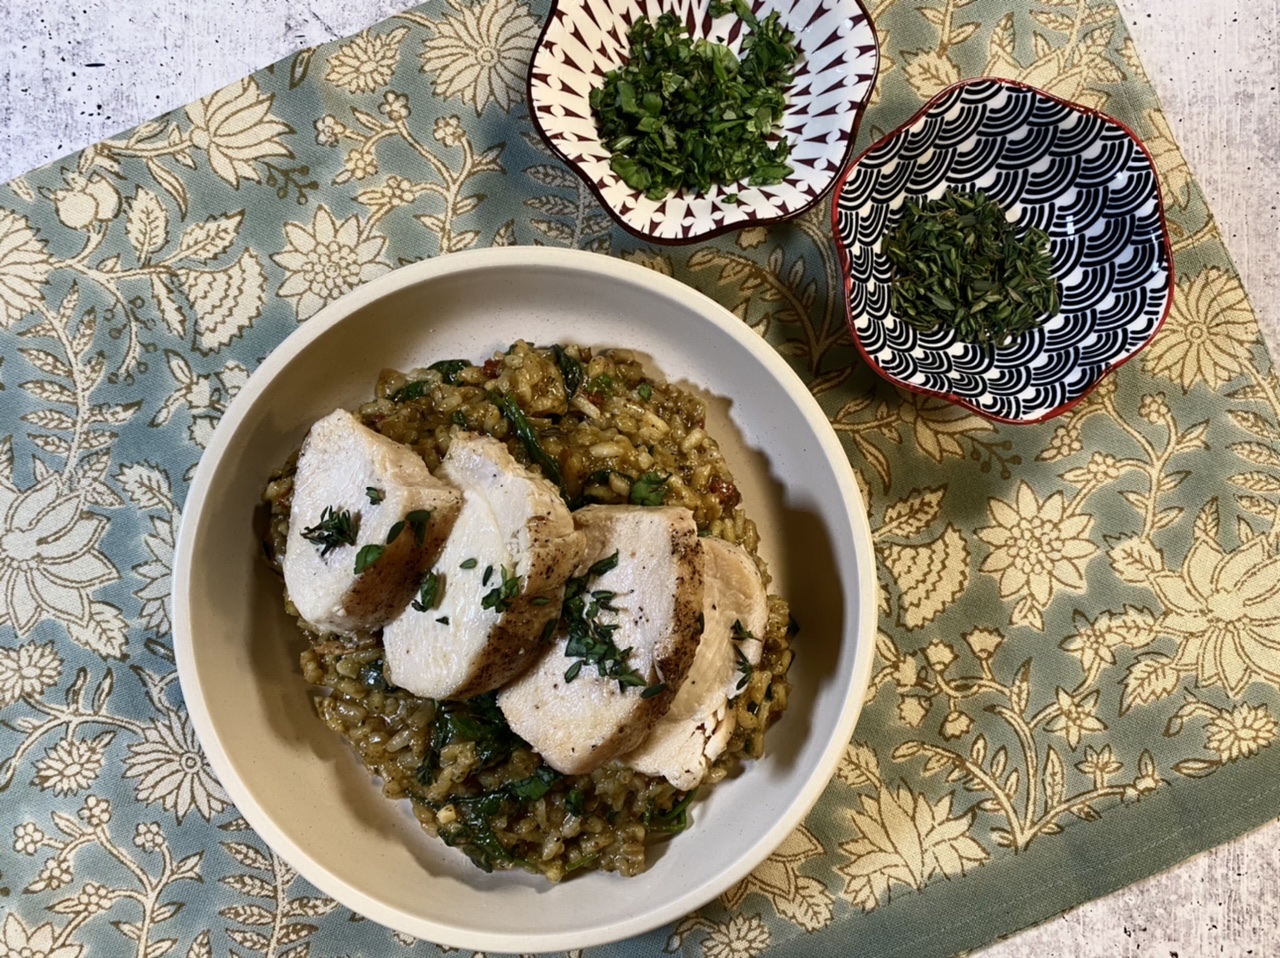 Sun-dried tomato pesto risotto with sliced chicken breast on a wooden cutting board